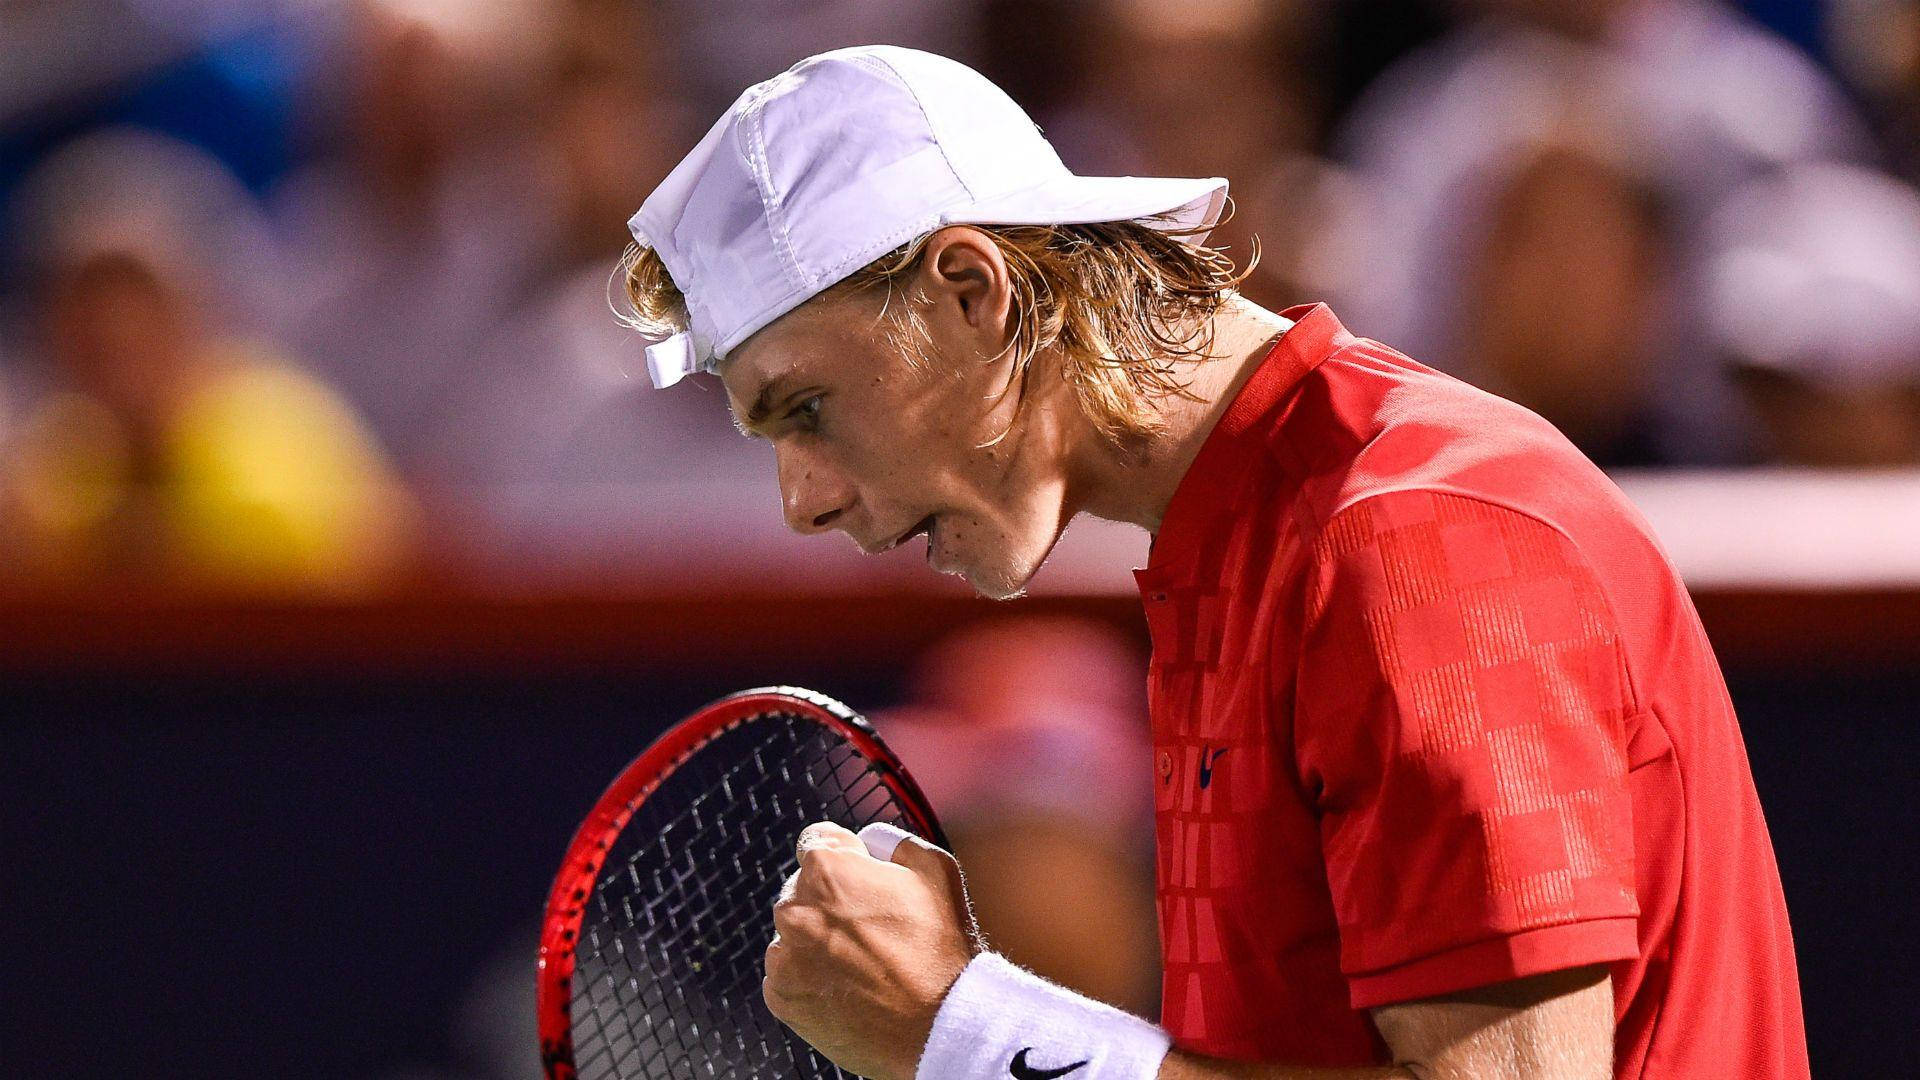 Acclaimed Tennis Athlete Denis Shapovalov In Mid-match Action Background